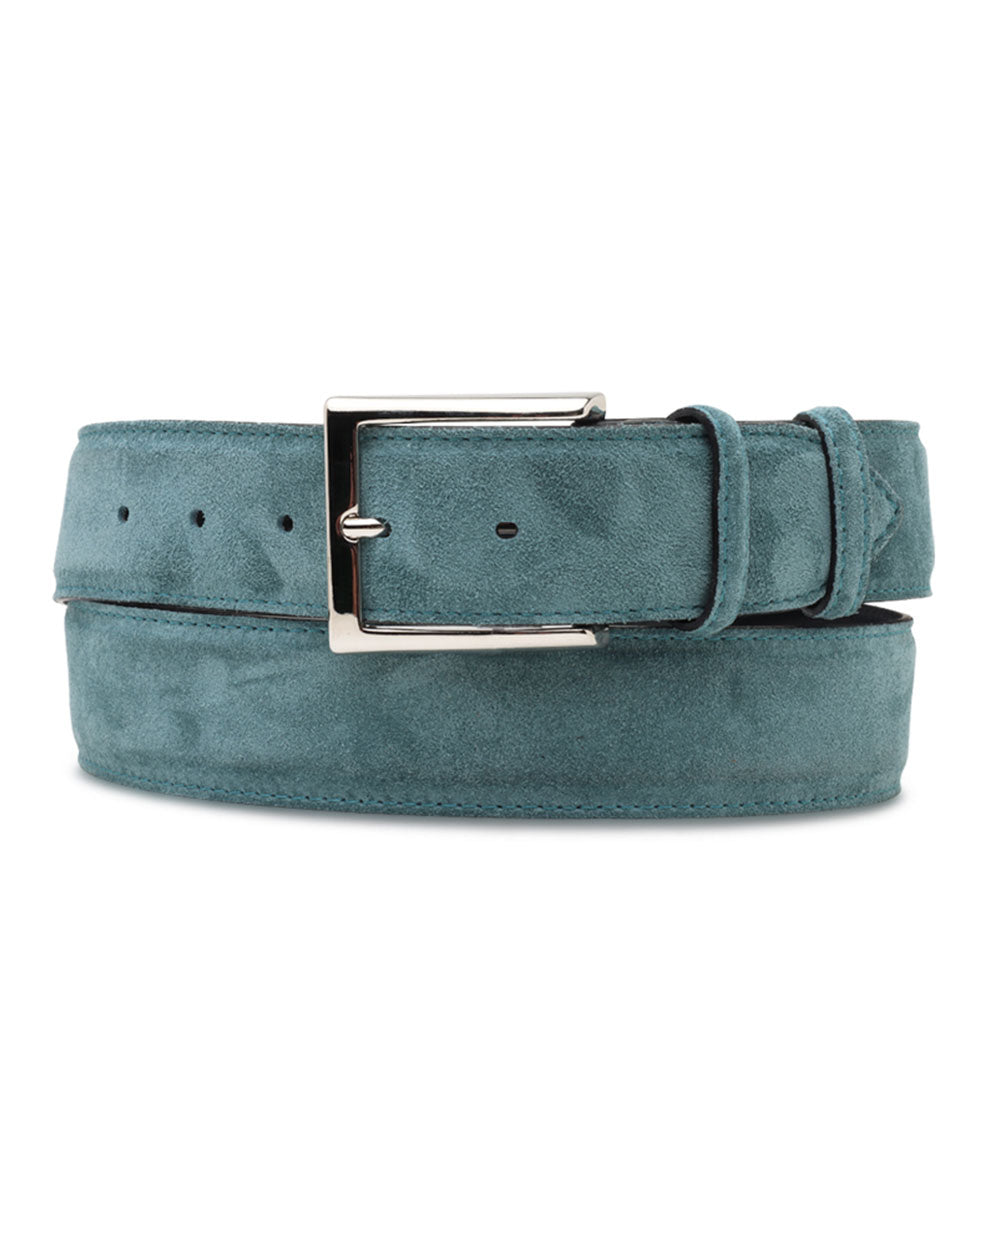 Suede Belt in Turquoise